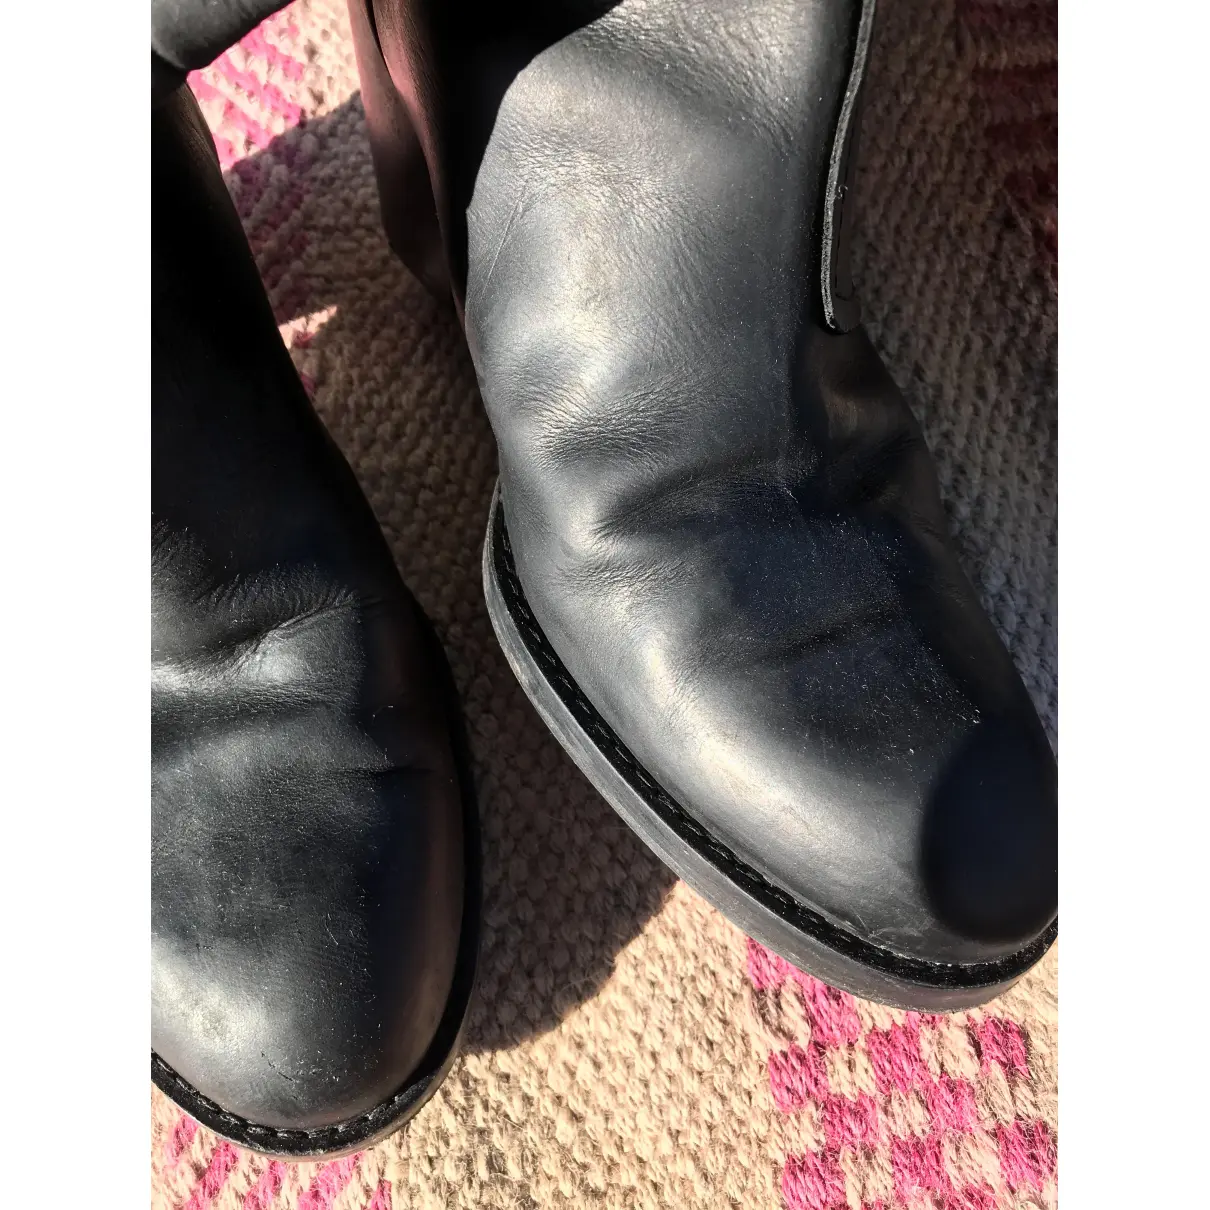 Buy Acne Studios Pistol leather riding boots online